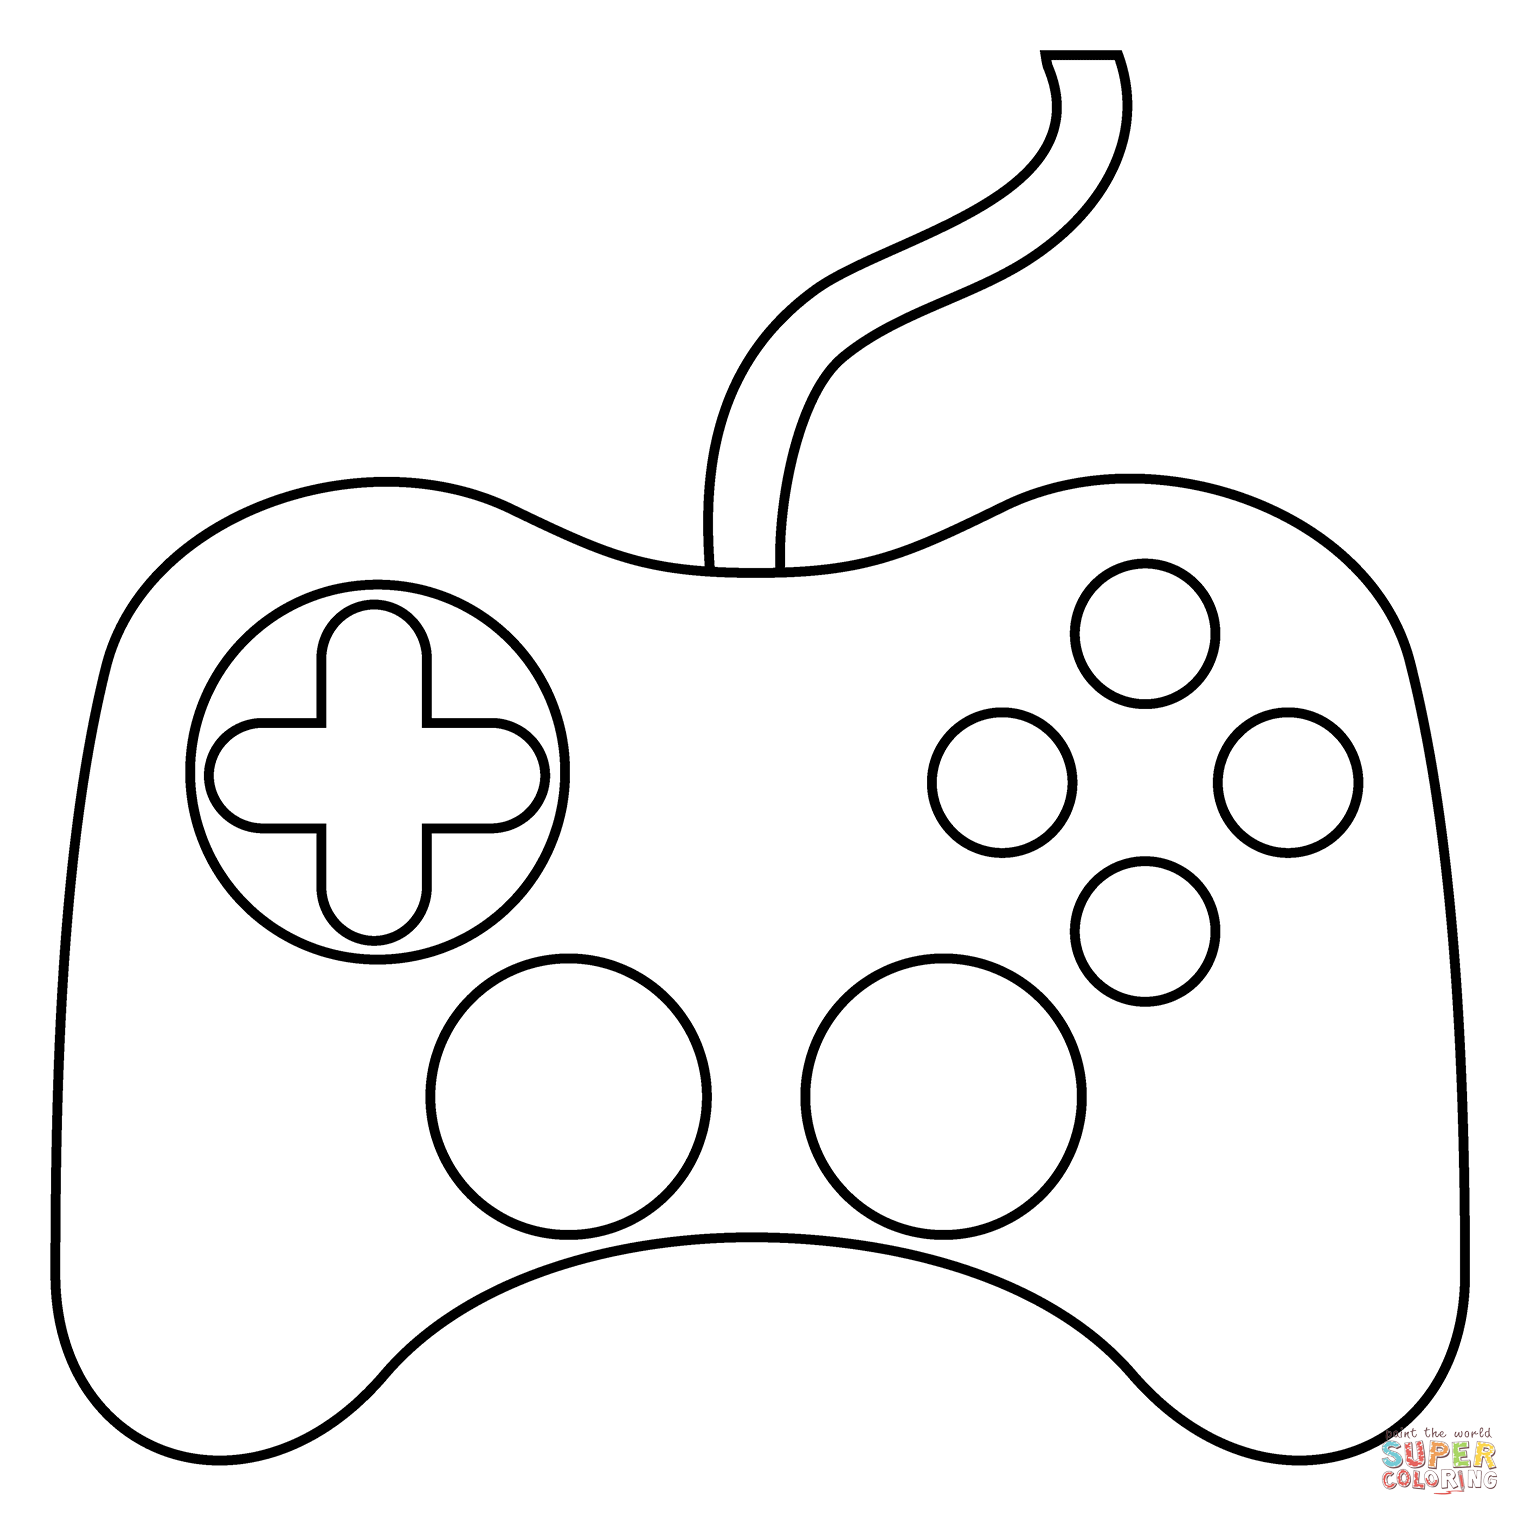 Video game emoji coloring page free printable coloring pages